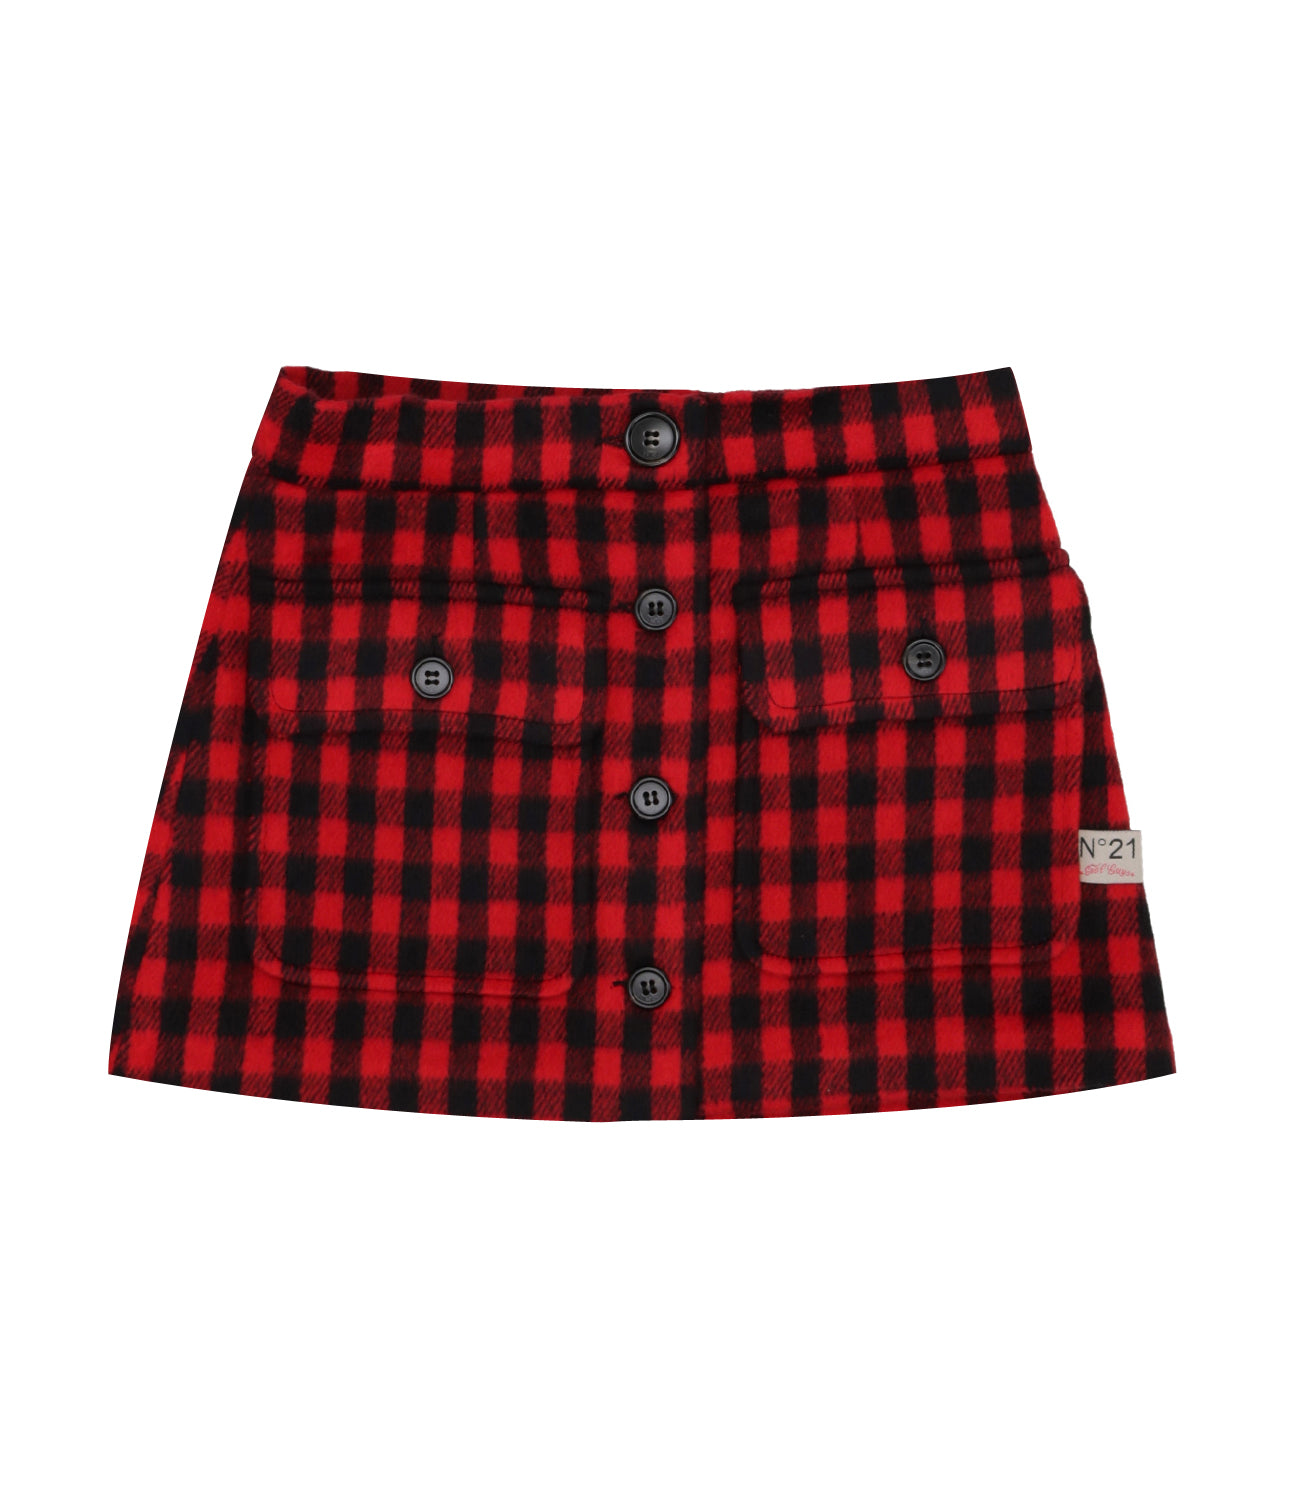 N21 Kids | Red and Black Skirt